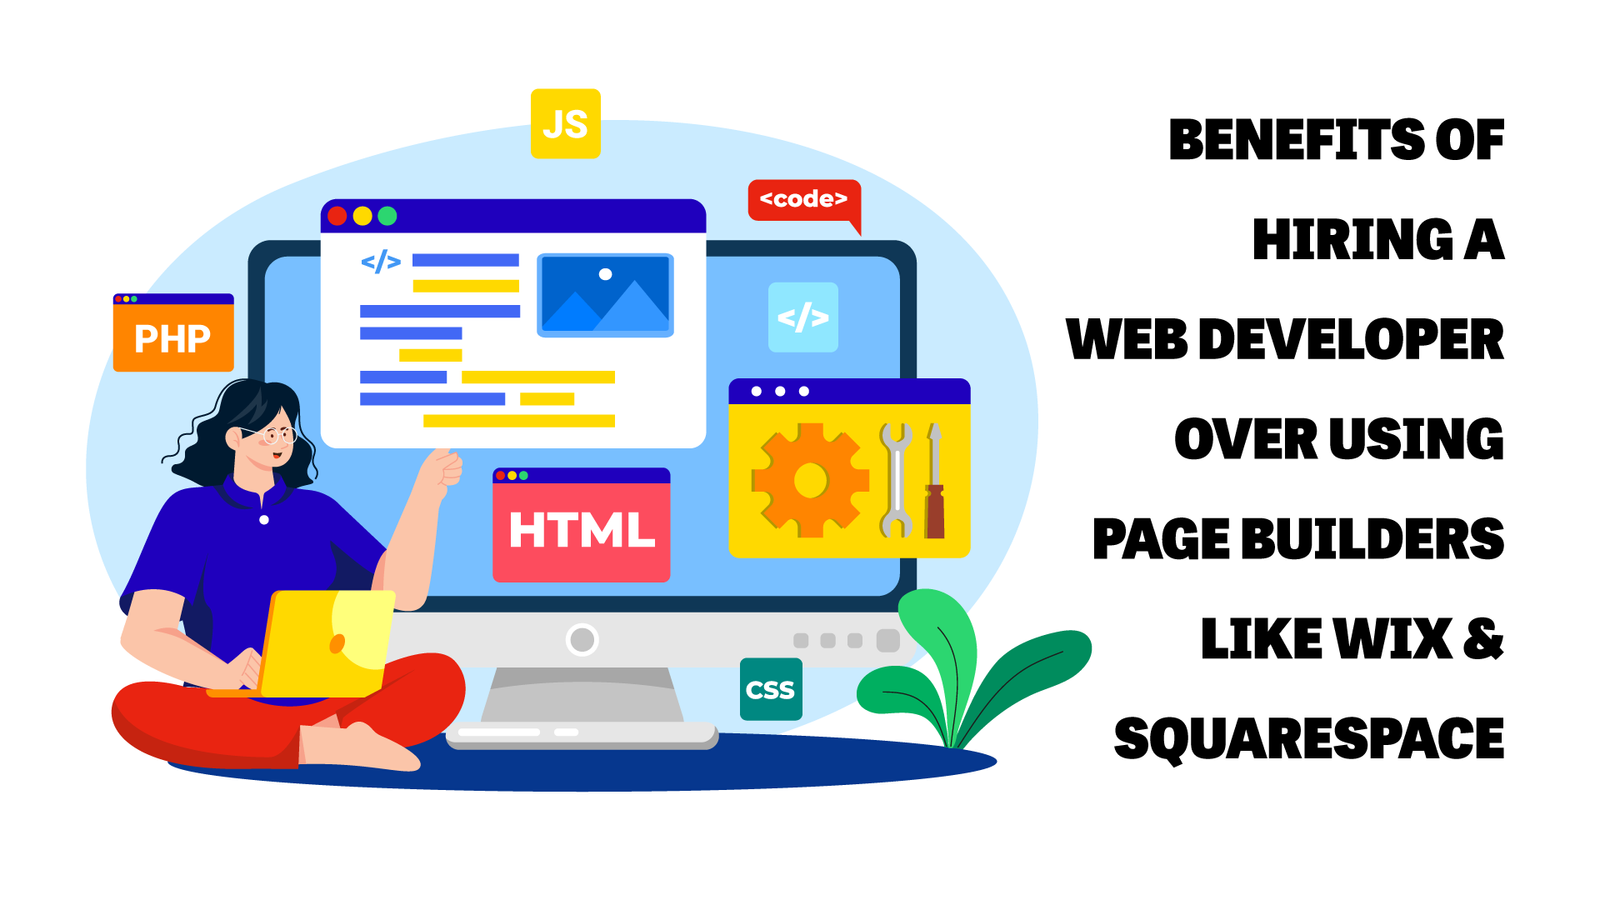 Benefits of Hiring a Web Developer over Using Page Builders like WIX & SquareSpace